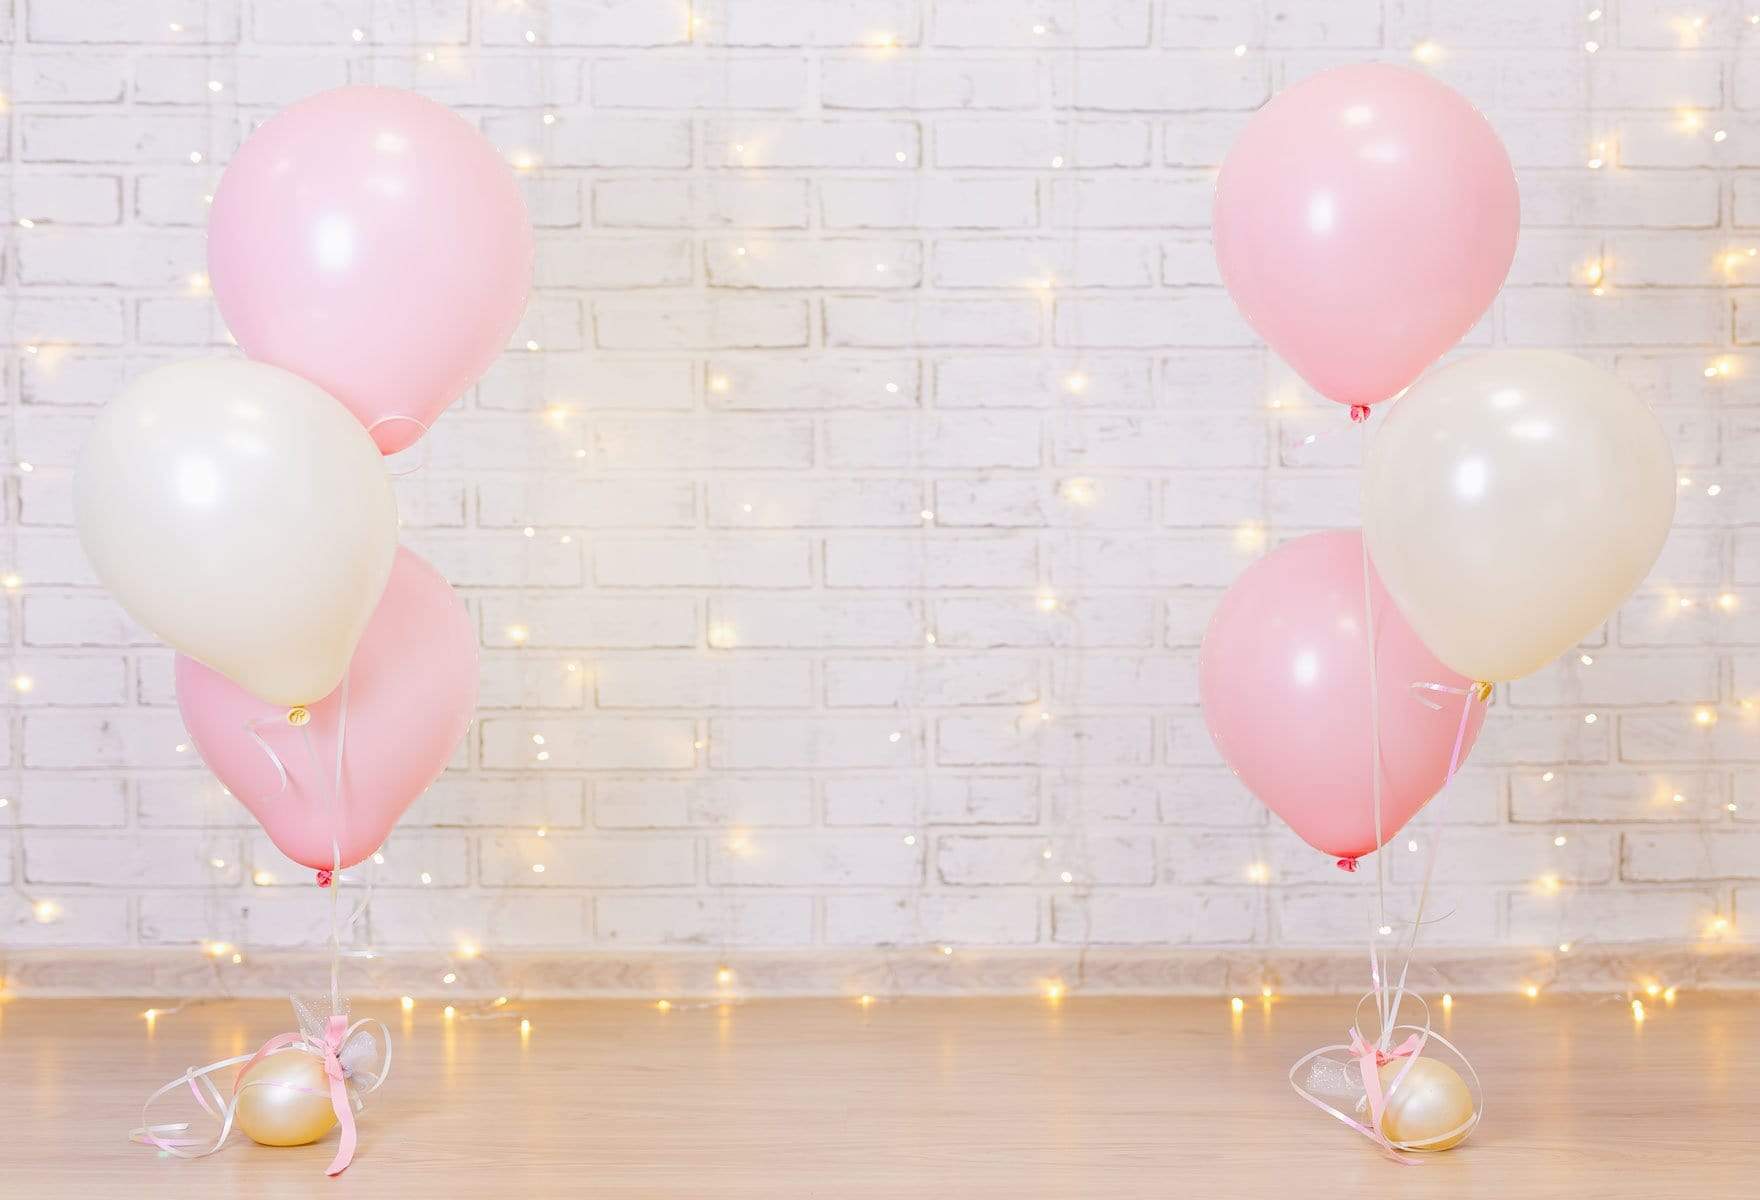 Katebackdrop£ºKate White Brick Wall with Balloons and Decorations Birthday Backdrop for Photography